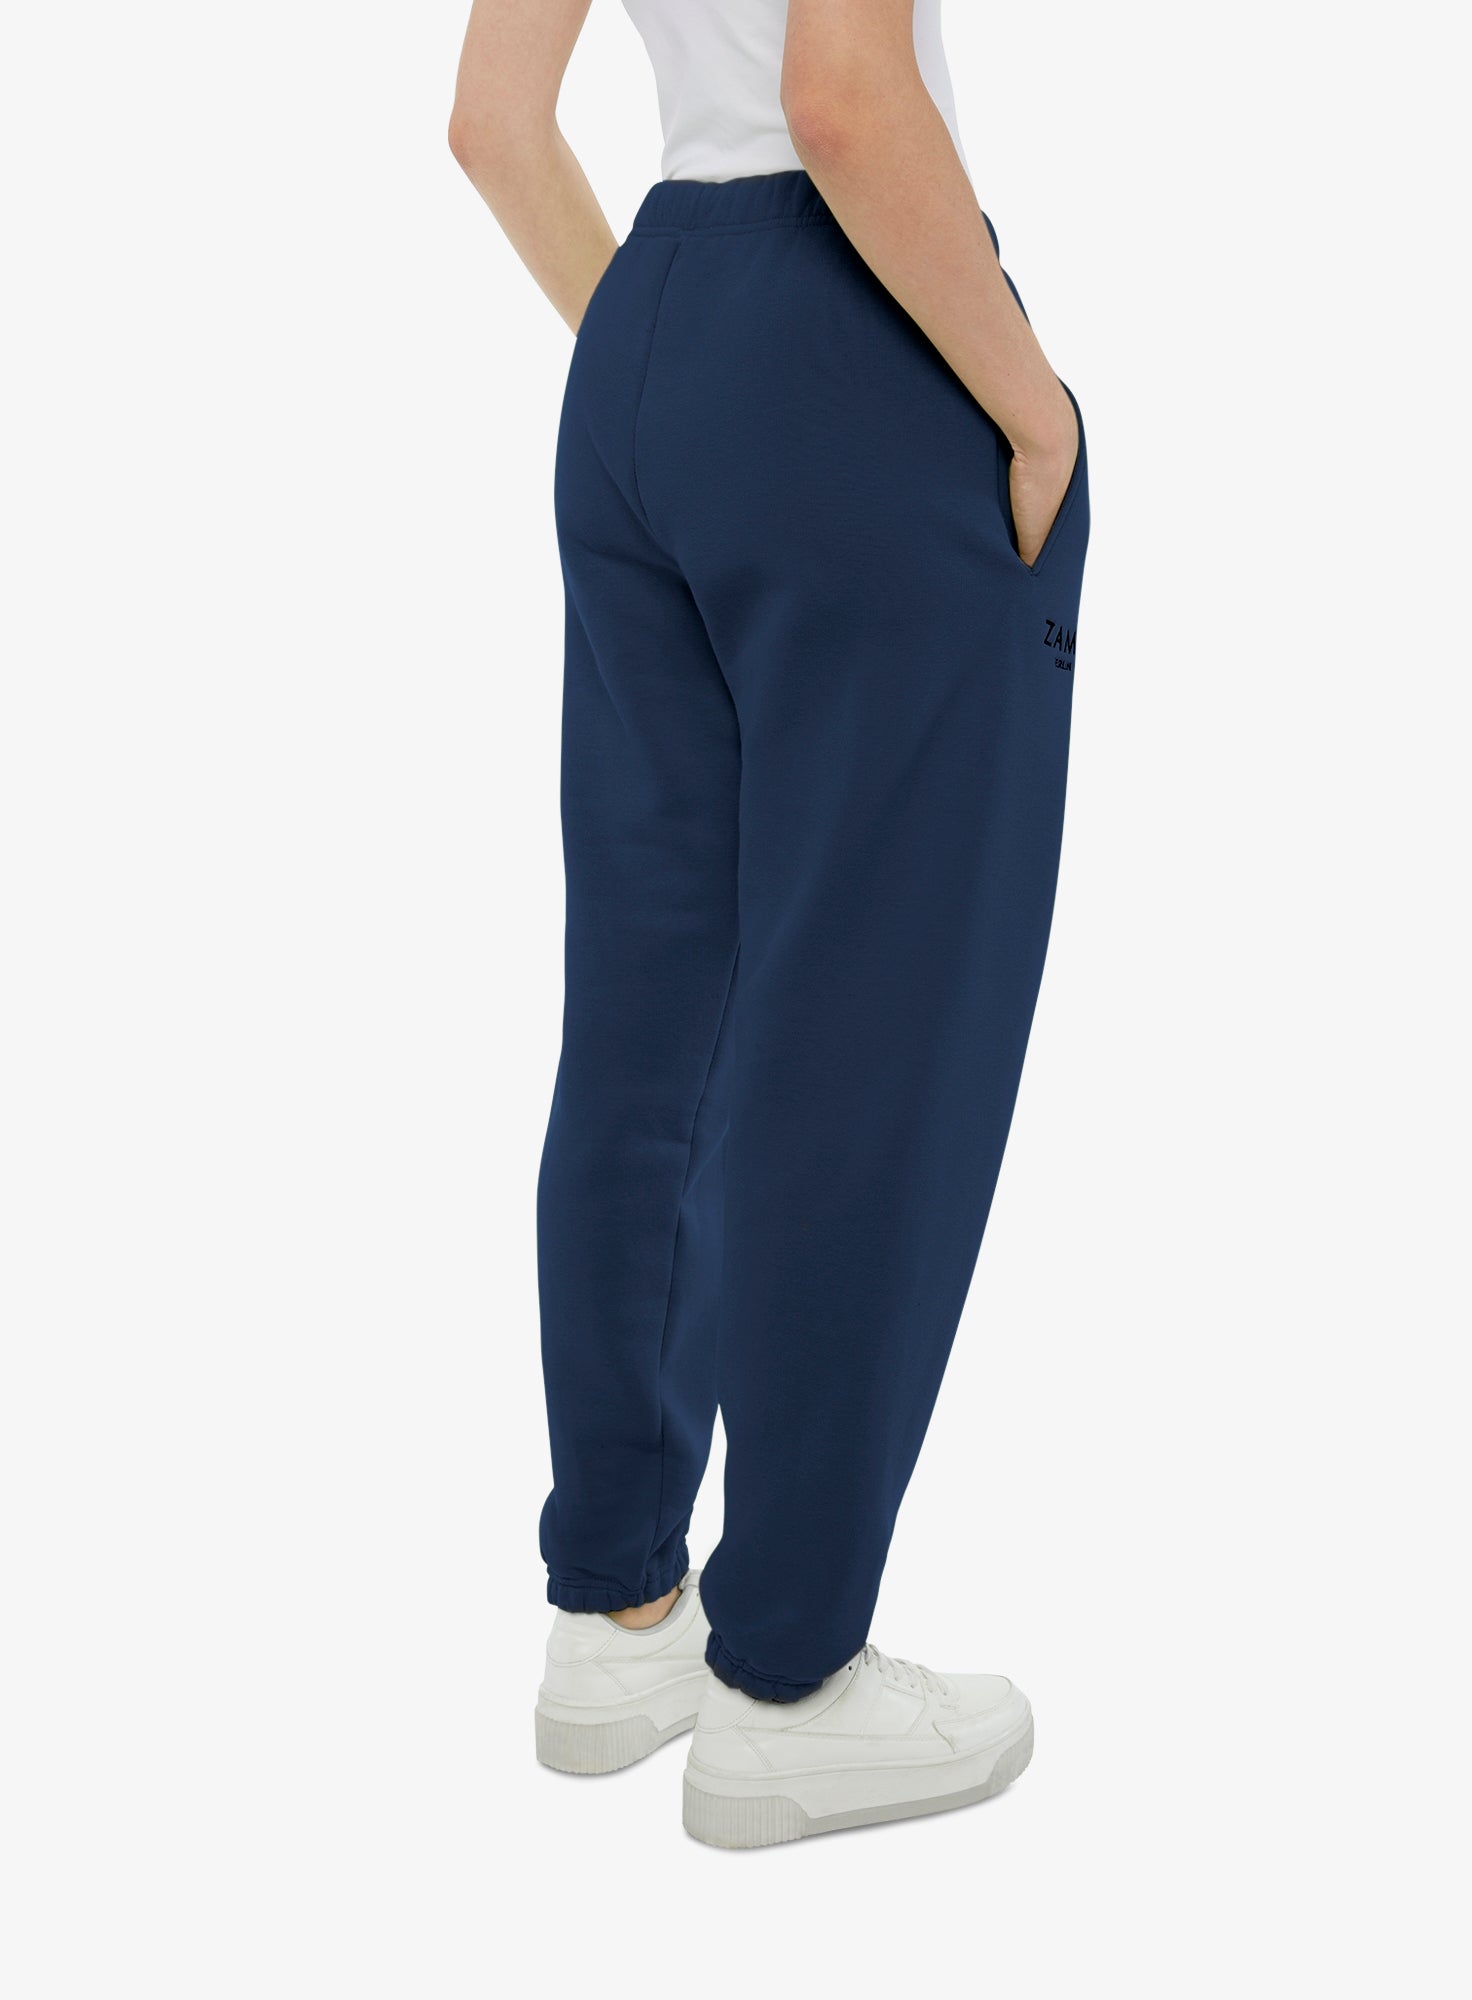 FAVORITE_03_SWEATPANTS_NAVY_Designed_in_Berlin_Made_to_last_Handmade_in_Poland.